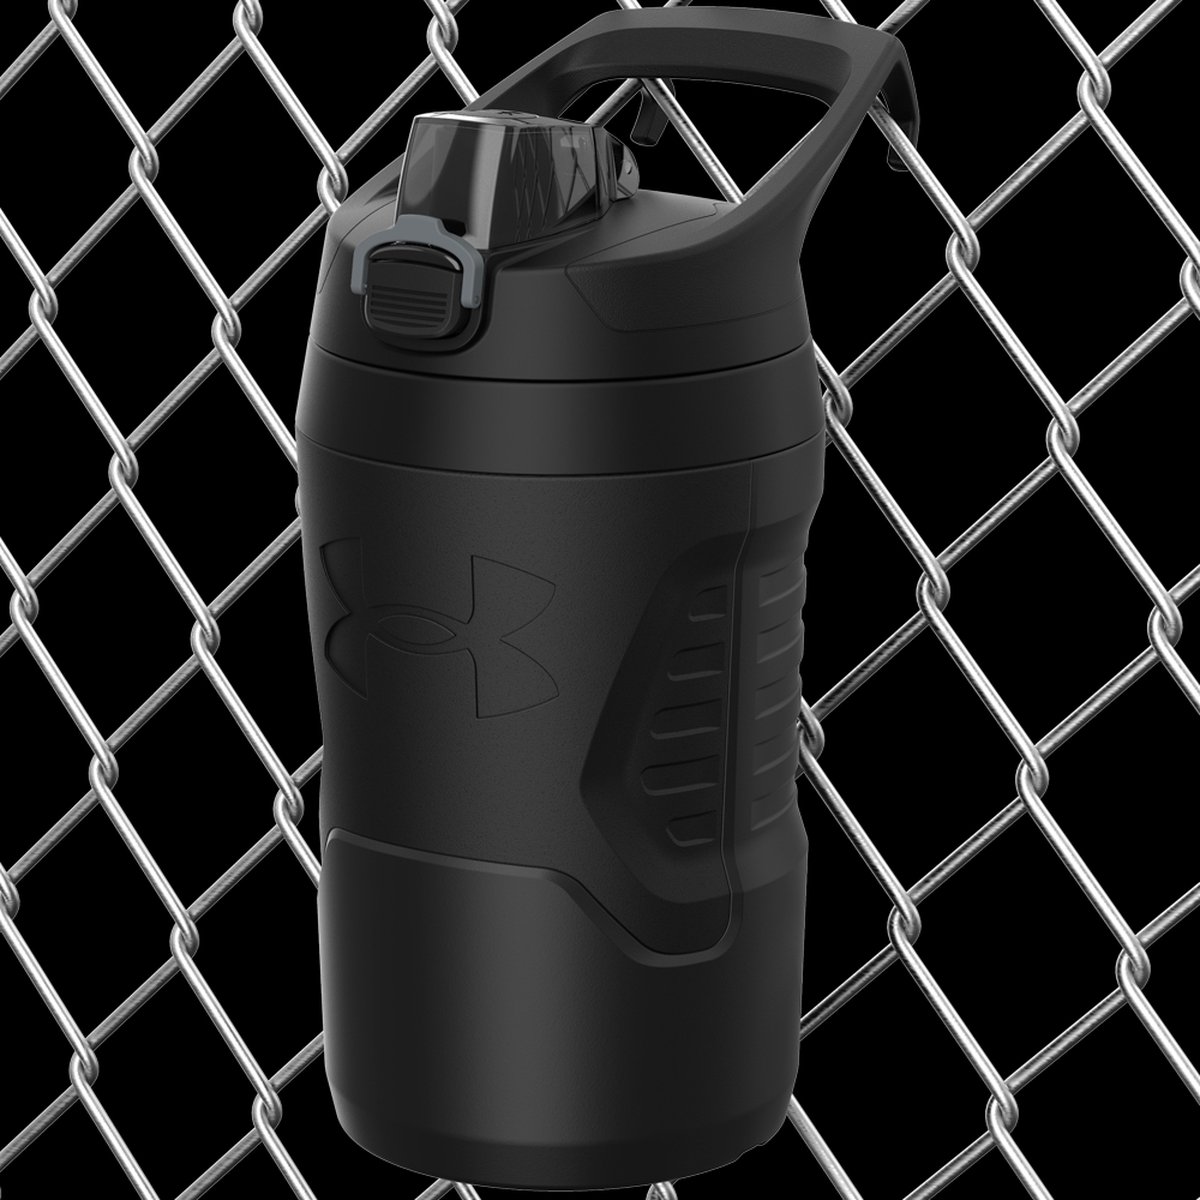 Water bottle - Under Armour - Sideline Squeeze - 950 mm - White